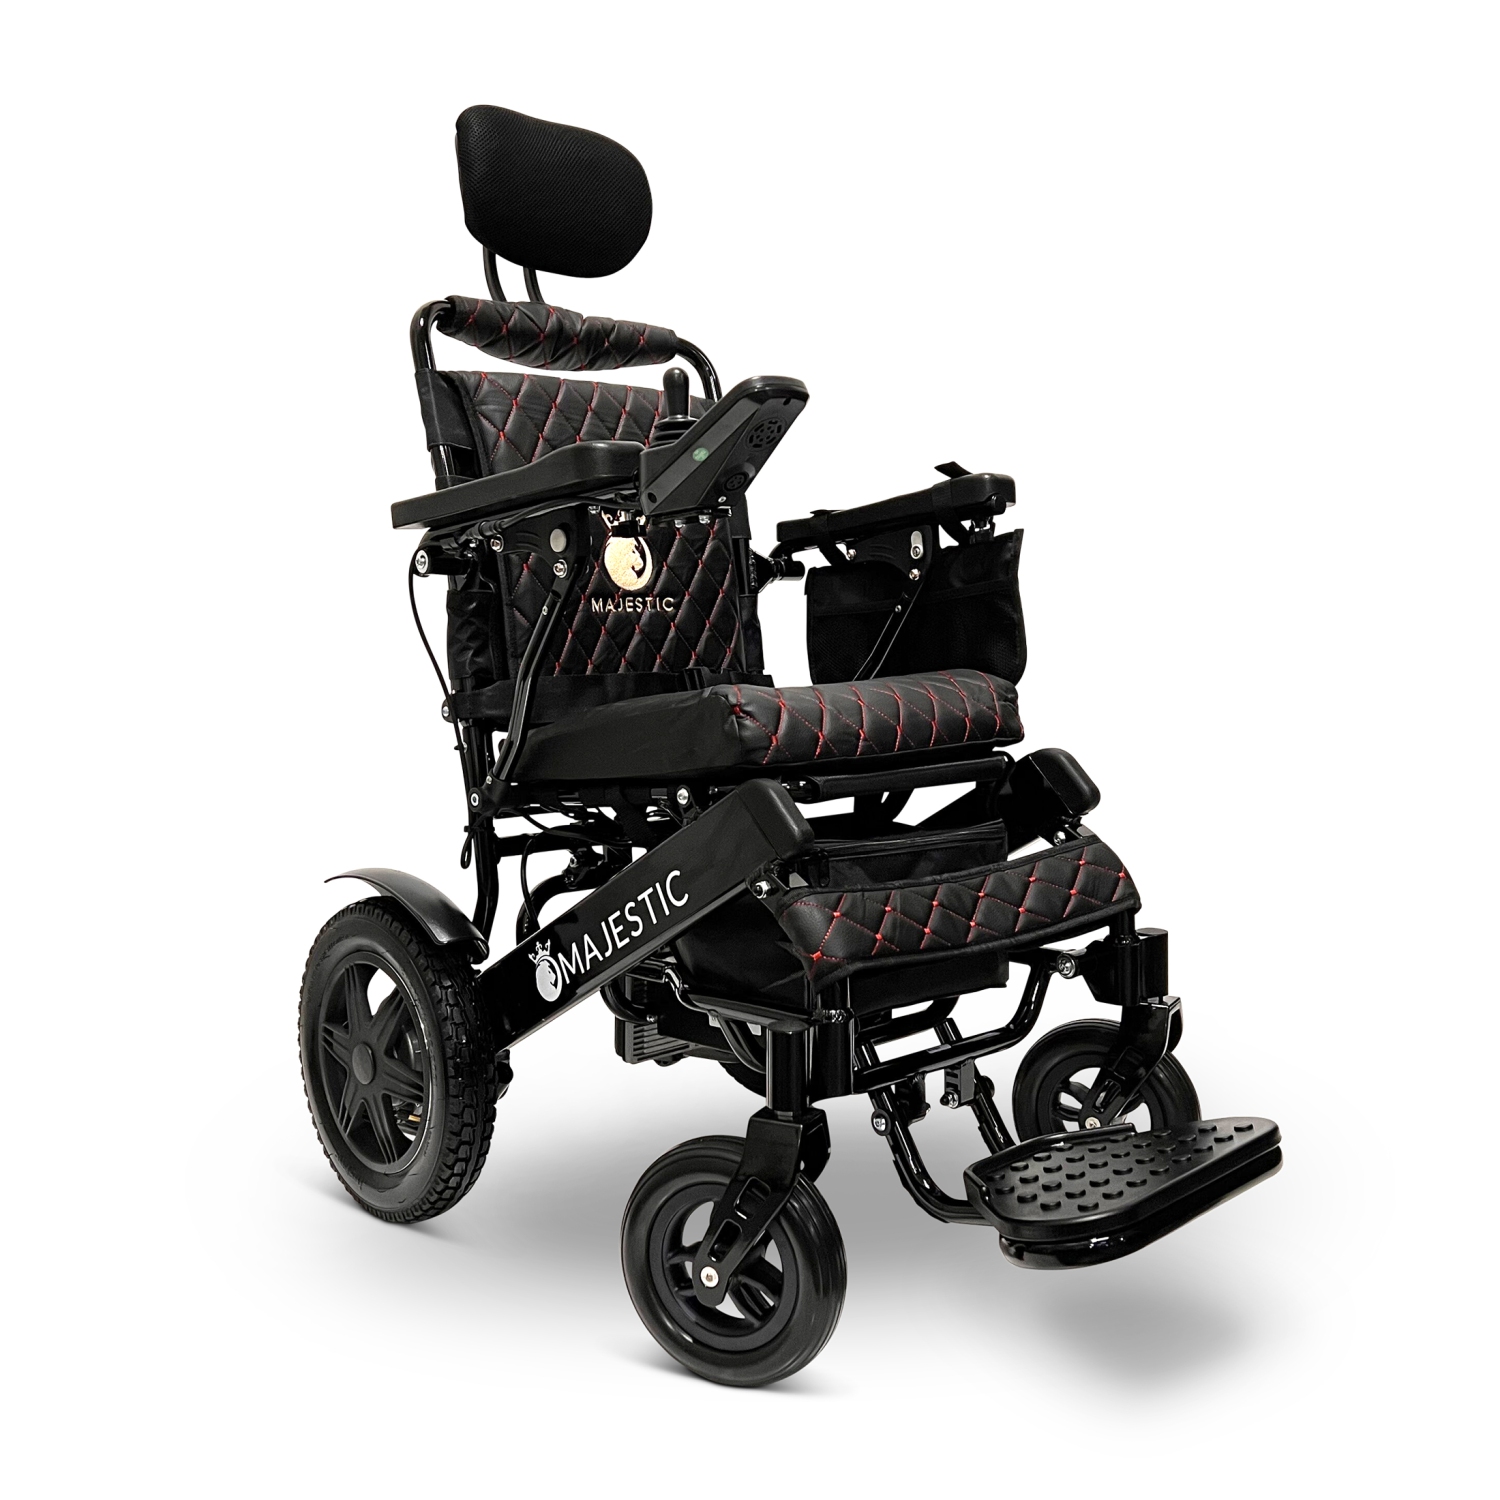 MAJESTIC IQ-9000 Airline Approved Luxury Electric Wheelchair | Auto Recline, LCD Joystick, Foldable, Up to 30 KM Range, Ultra-Light | 17’’ Seat Width, Black Frame, Black Textile